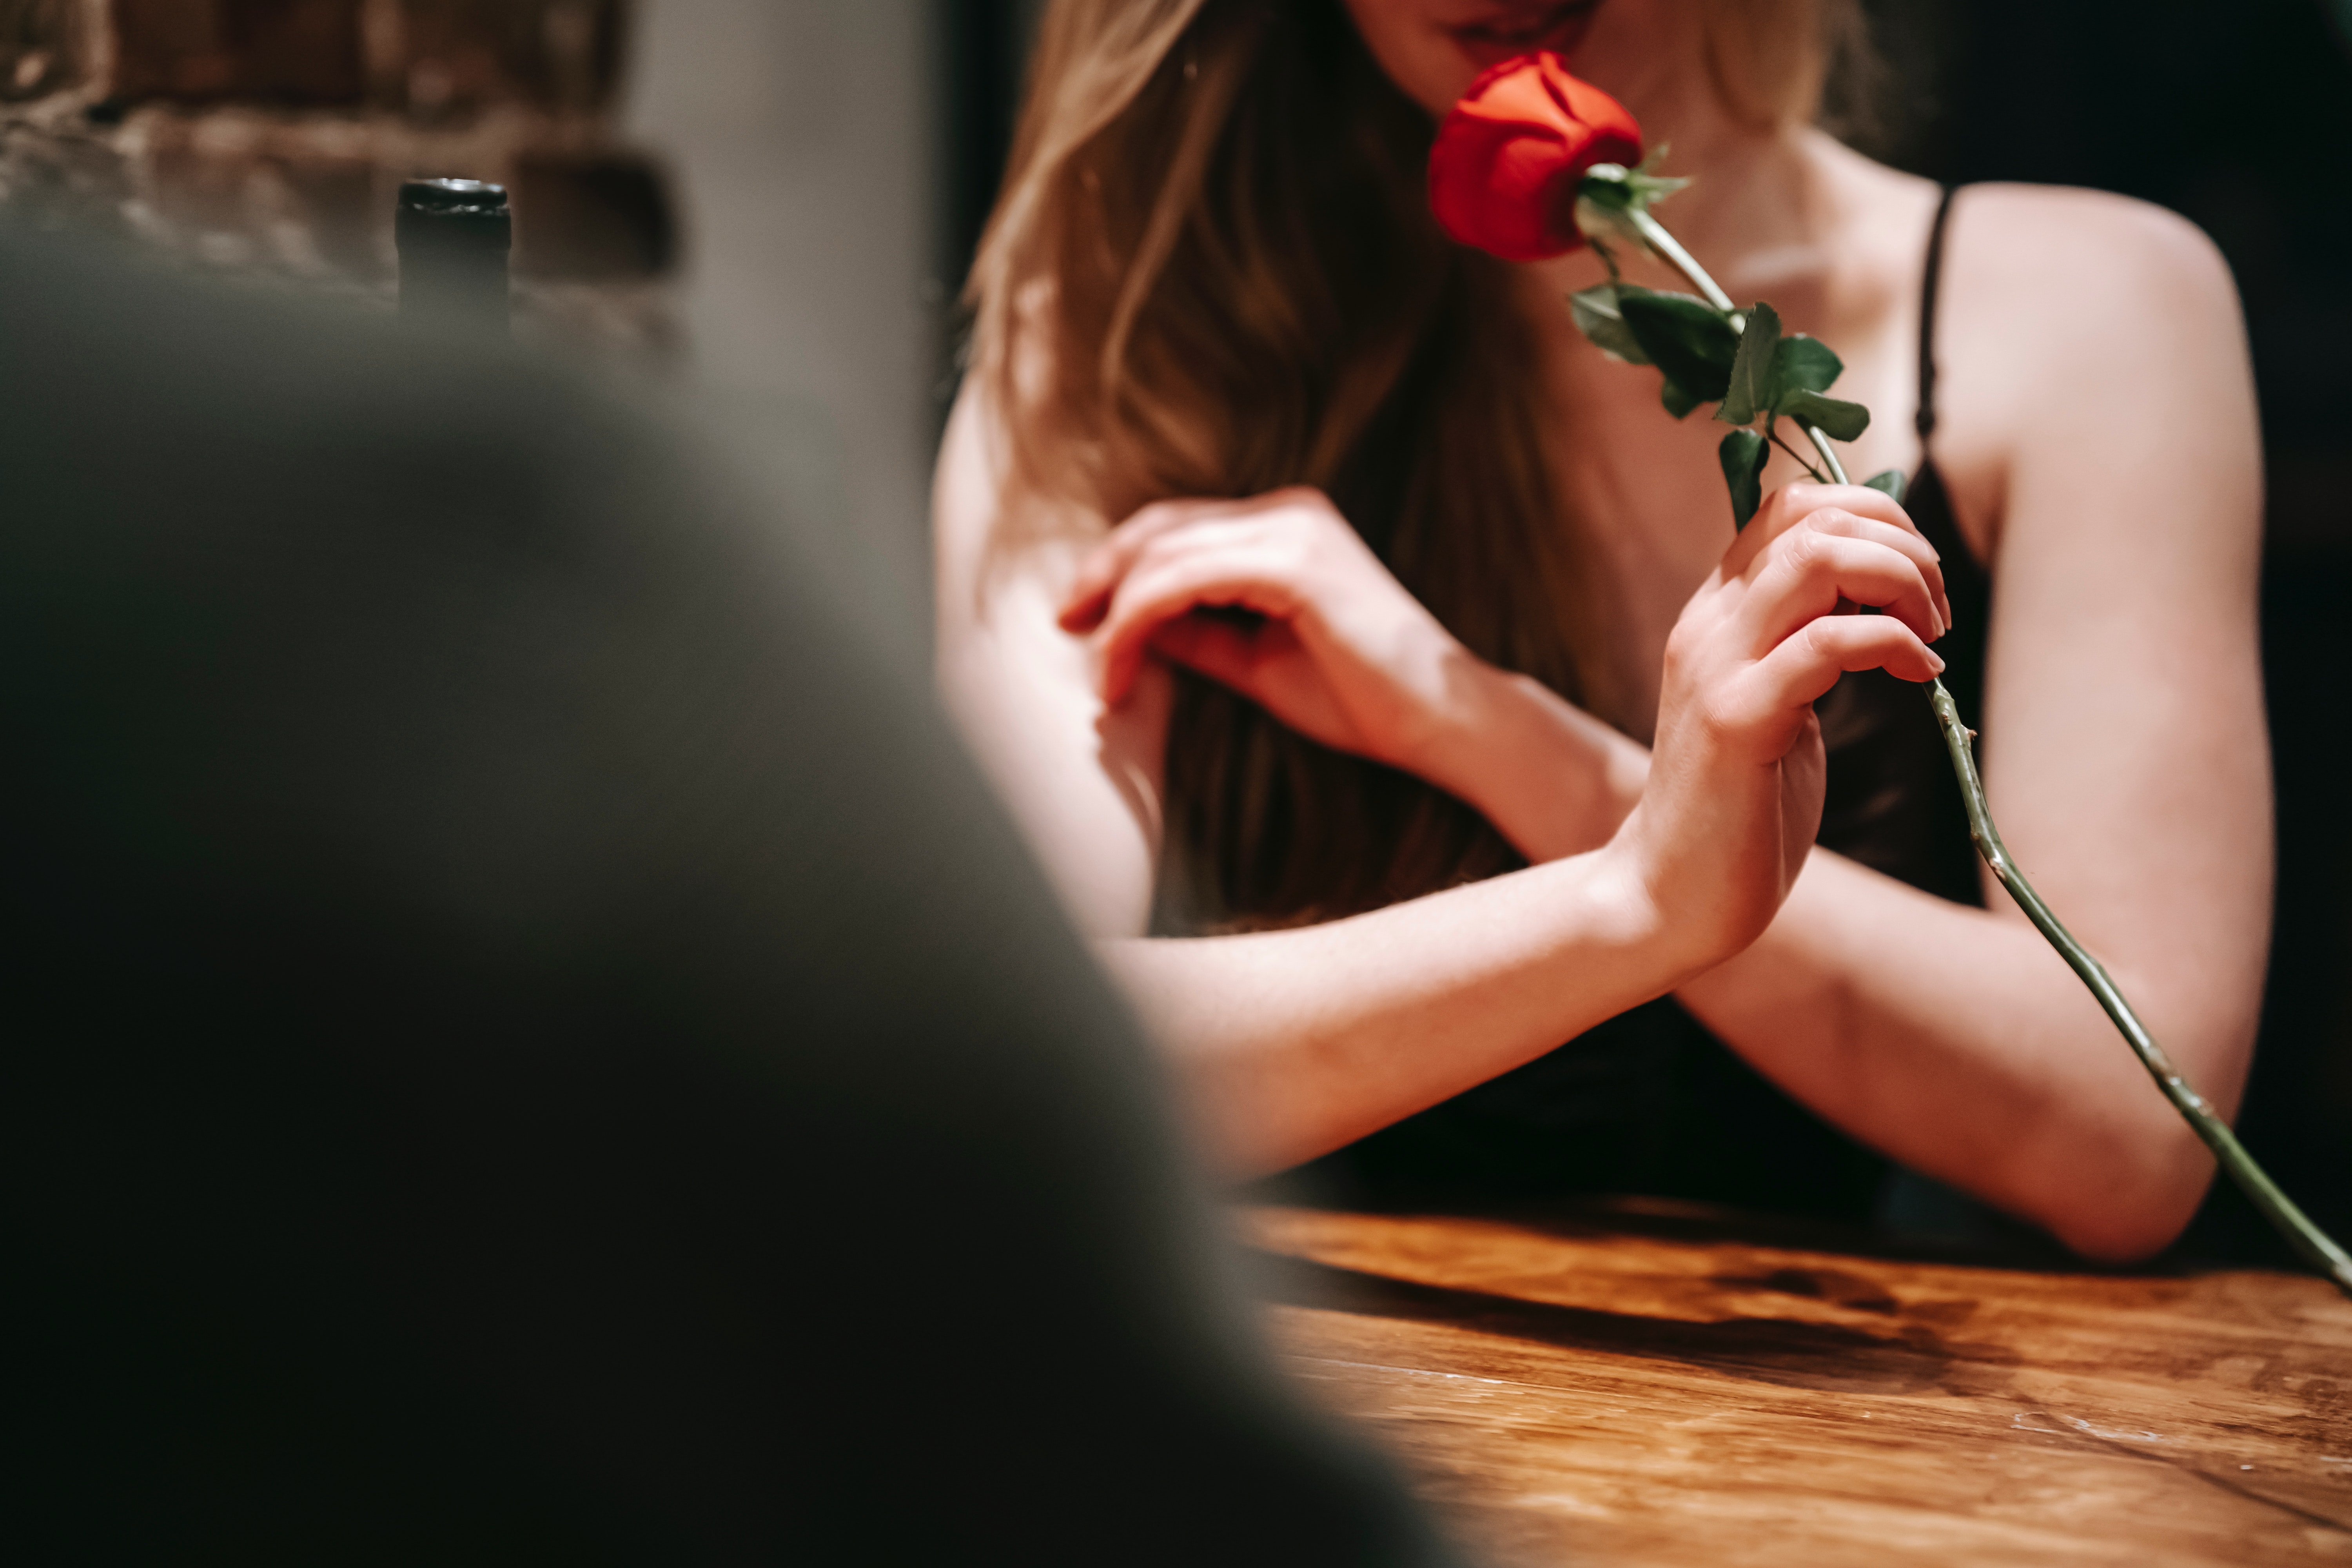 Love sparked in Adam's life following the dinner date with Stacey. | Source: Pexels